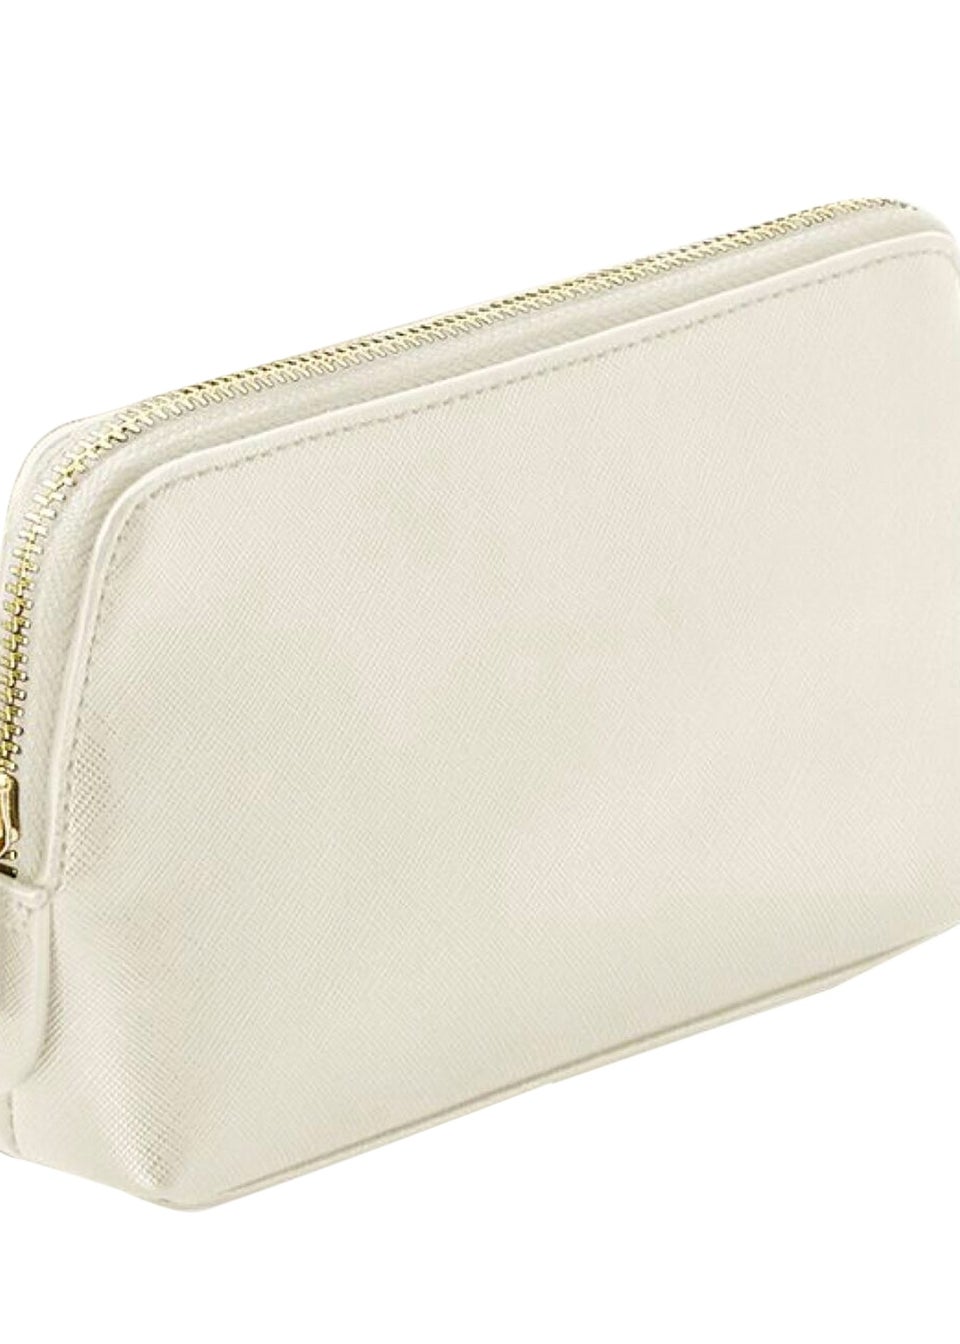 Bagbase Oyster Boutique Toiletry Bag